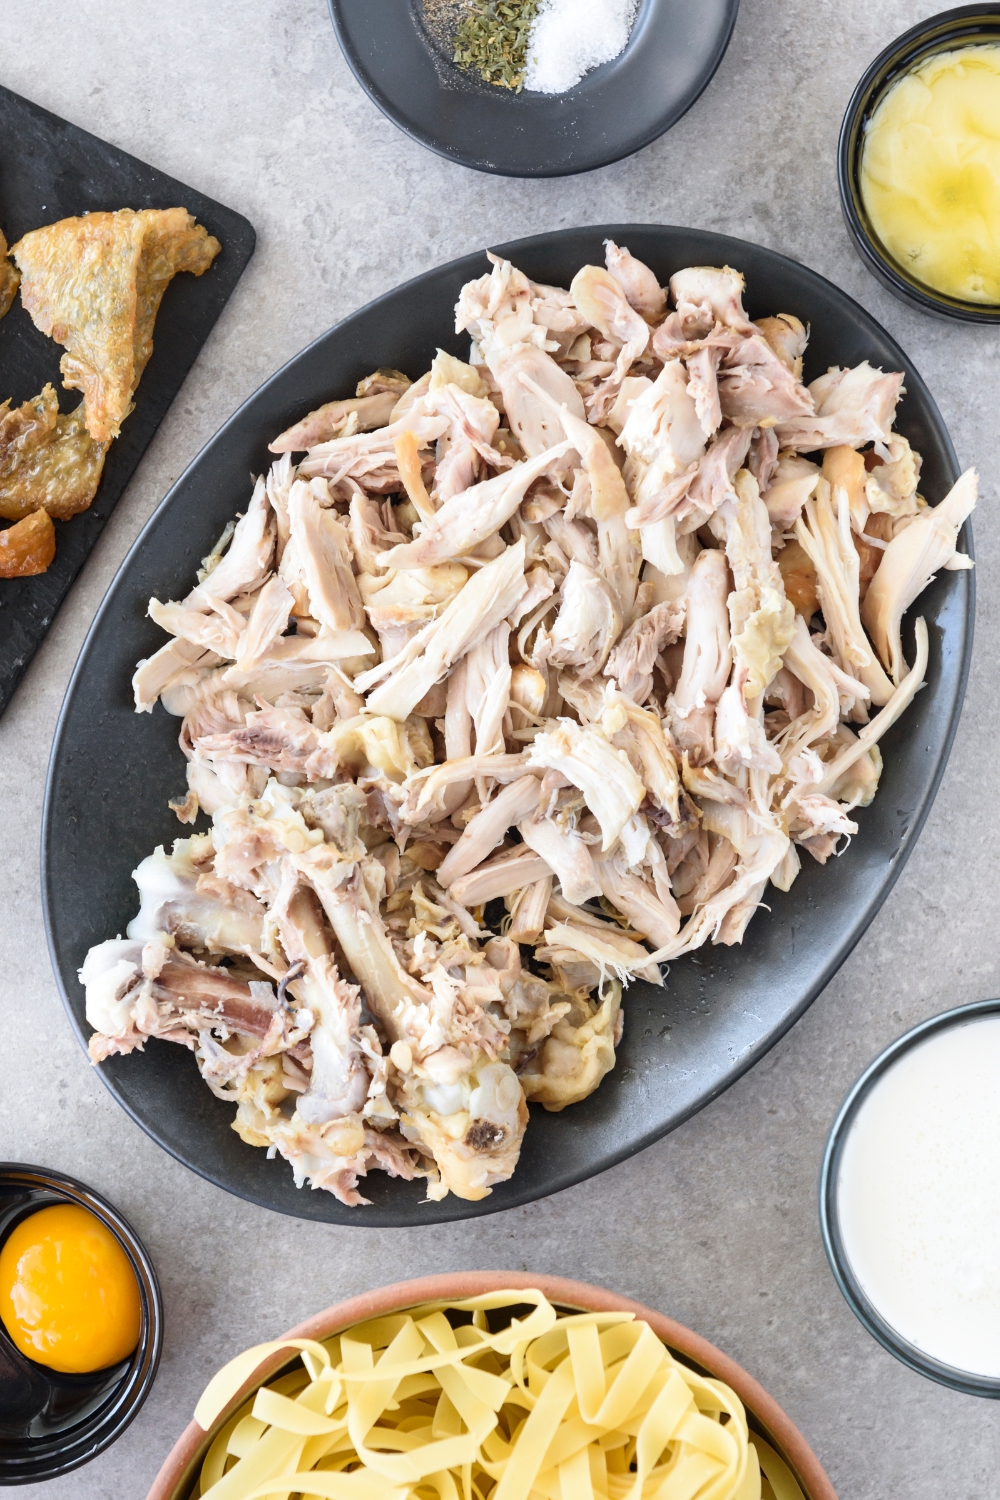 A serving plate filled with cooked and shredded chicken.